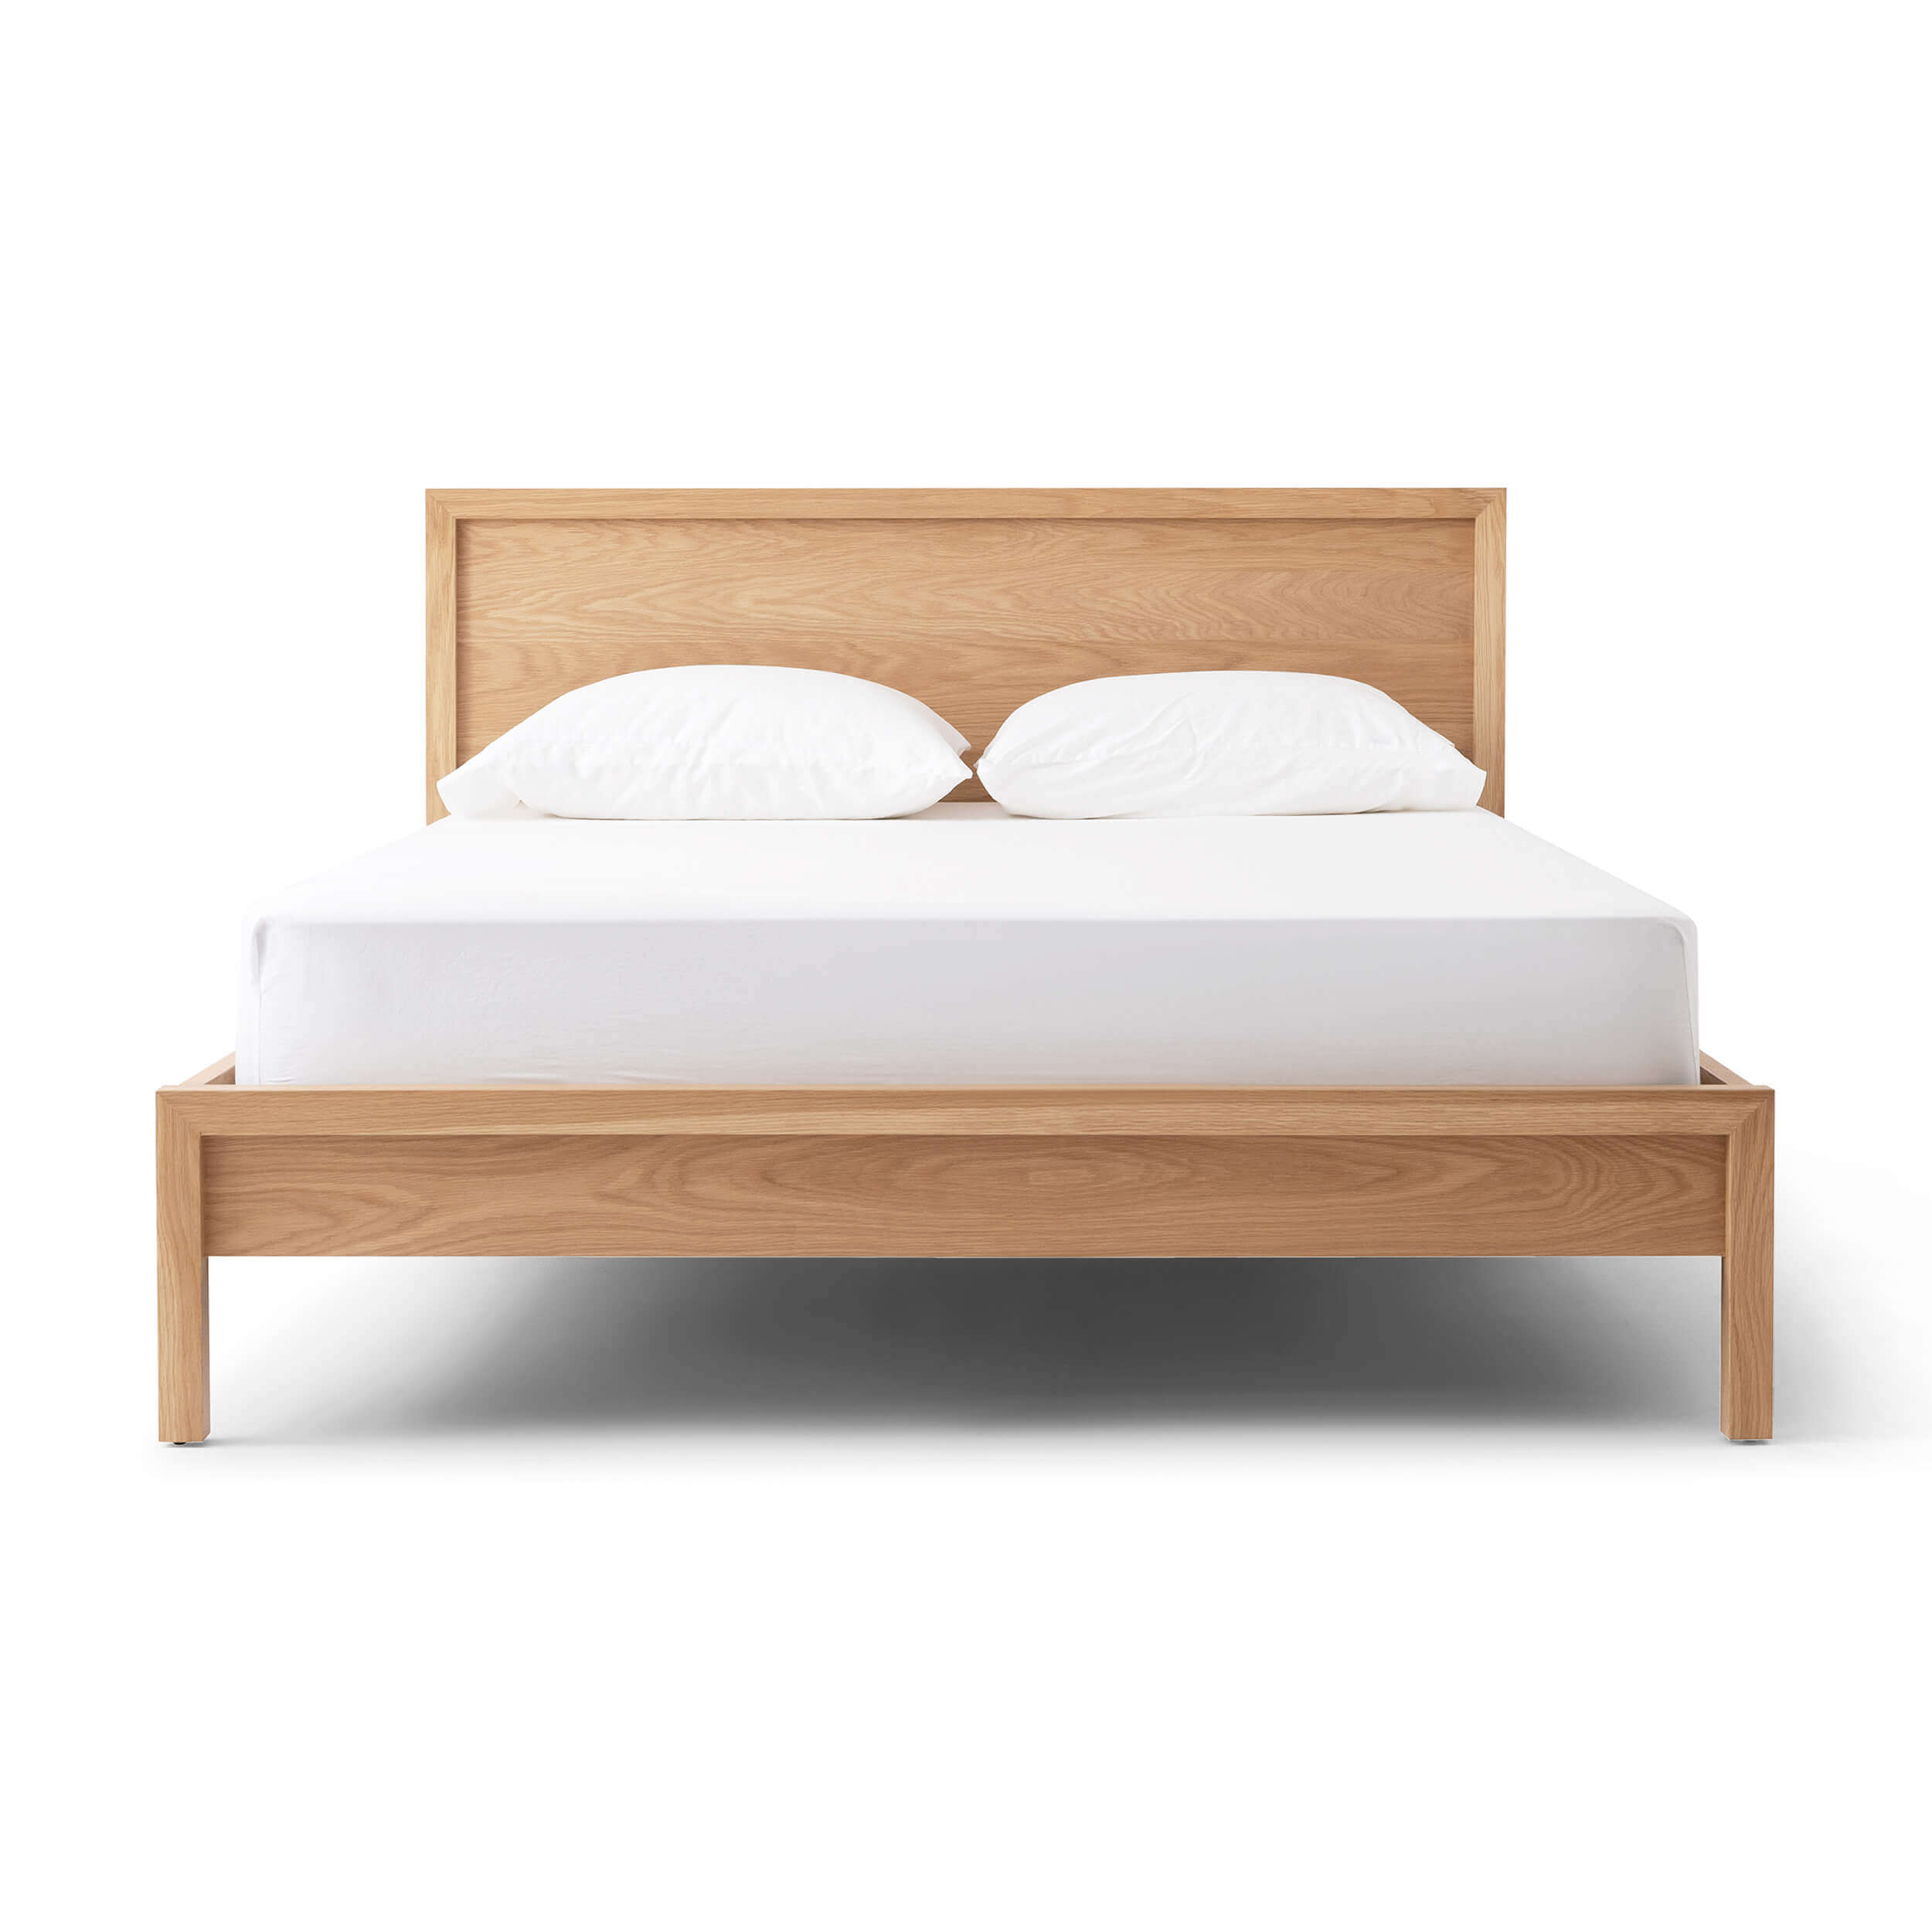 Modern Bedroom Furniture Eq3, Double Bed Frame With Storage Canada